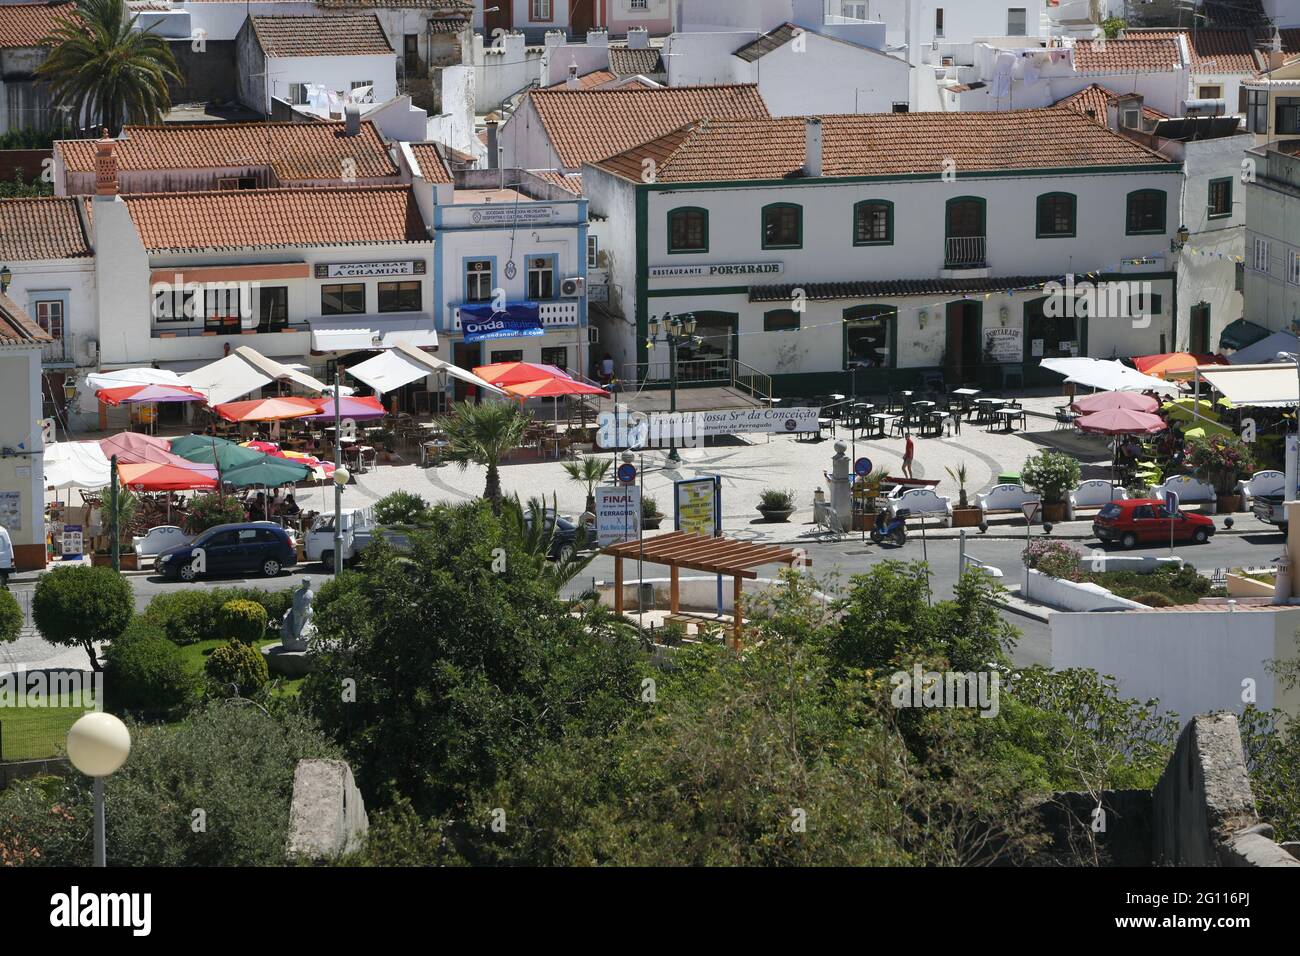 A general view of Ferragudo, a charming fishing town situated on the eastern side of the Arada River on the western border of the municipality of Lagoa, in Portugal and which is often claimed to be the prettiest village in the Algarve. Picture date: Thursday August 7, 2008. Stock Photo